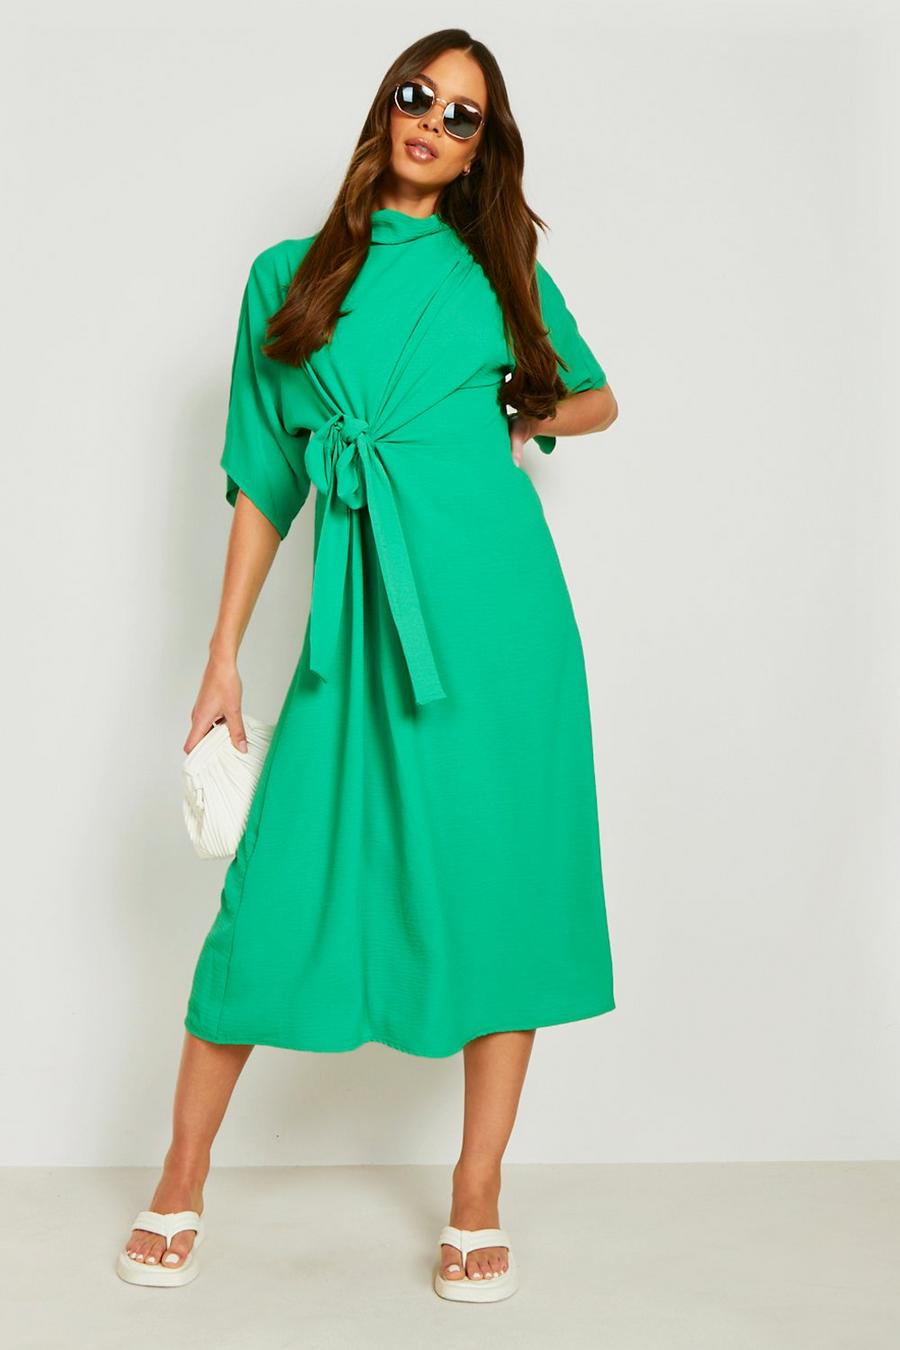 Emerald green Textured Knot Front Cowl Neck Midi Dress